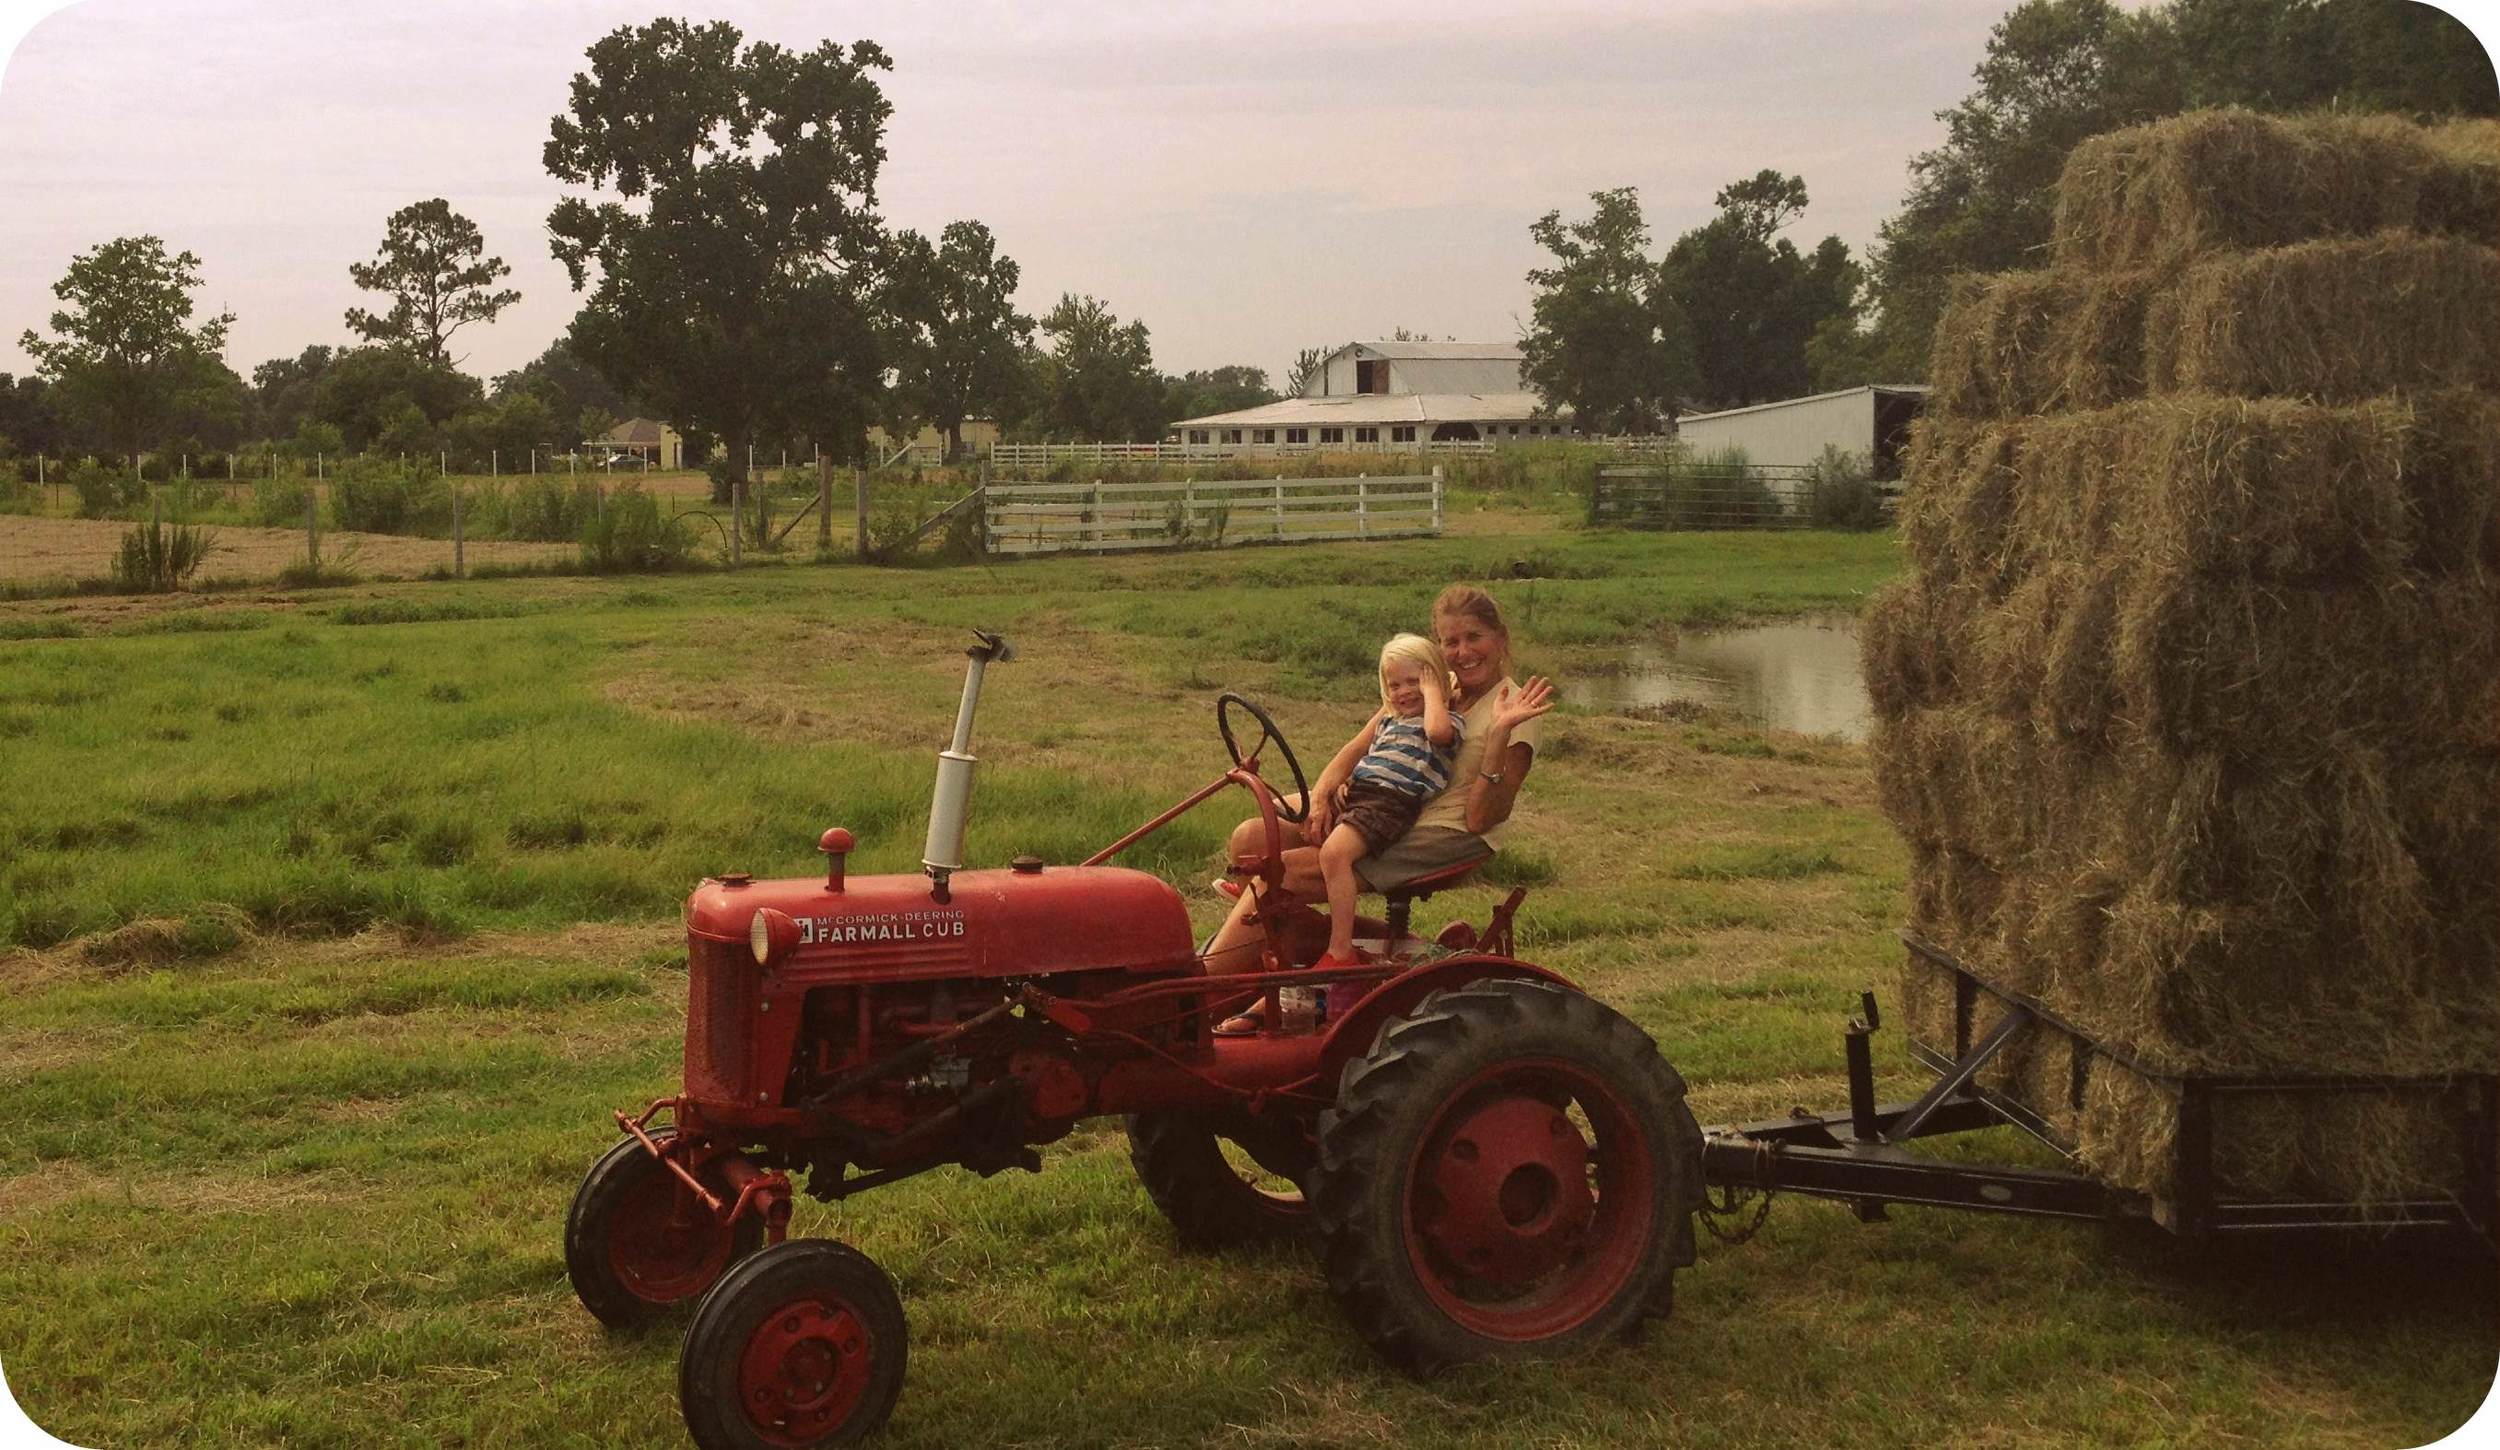 mom and kai on tractor edit.jpg